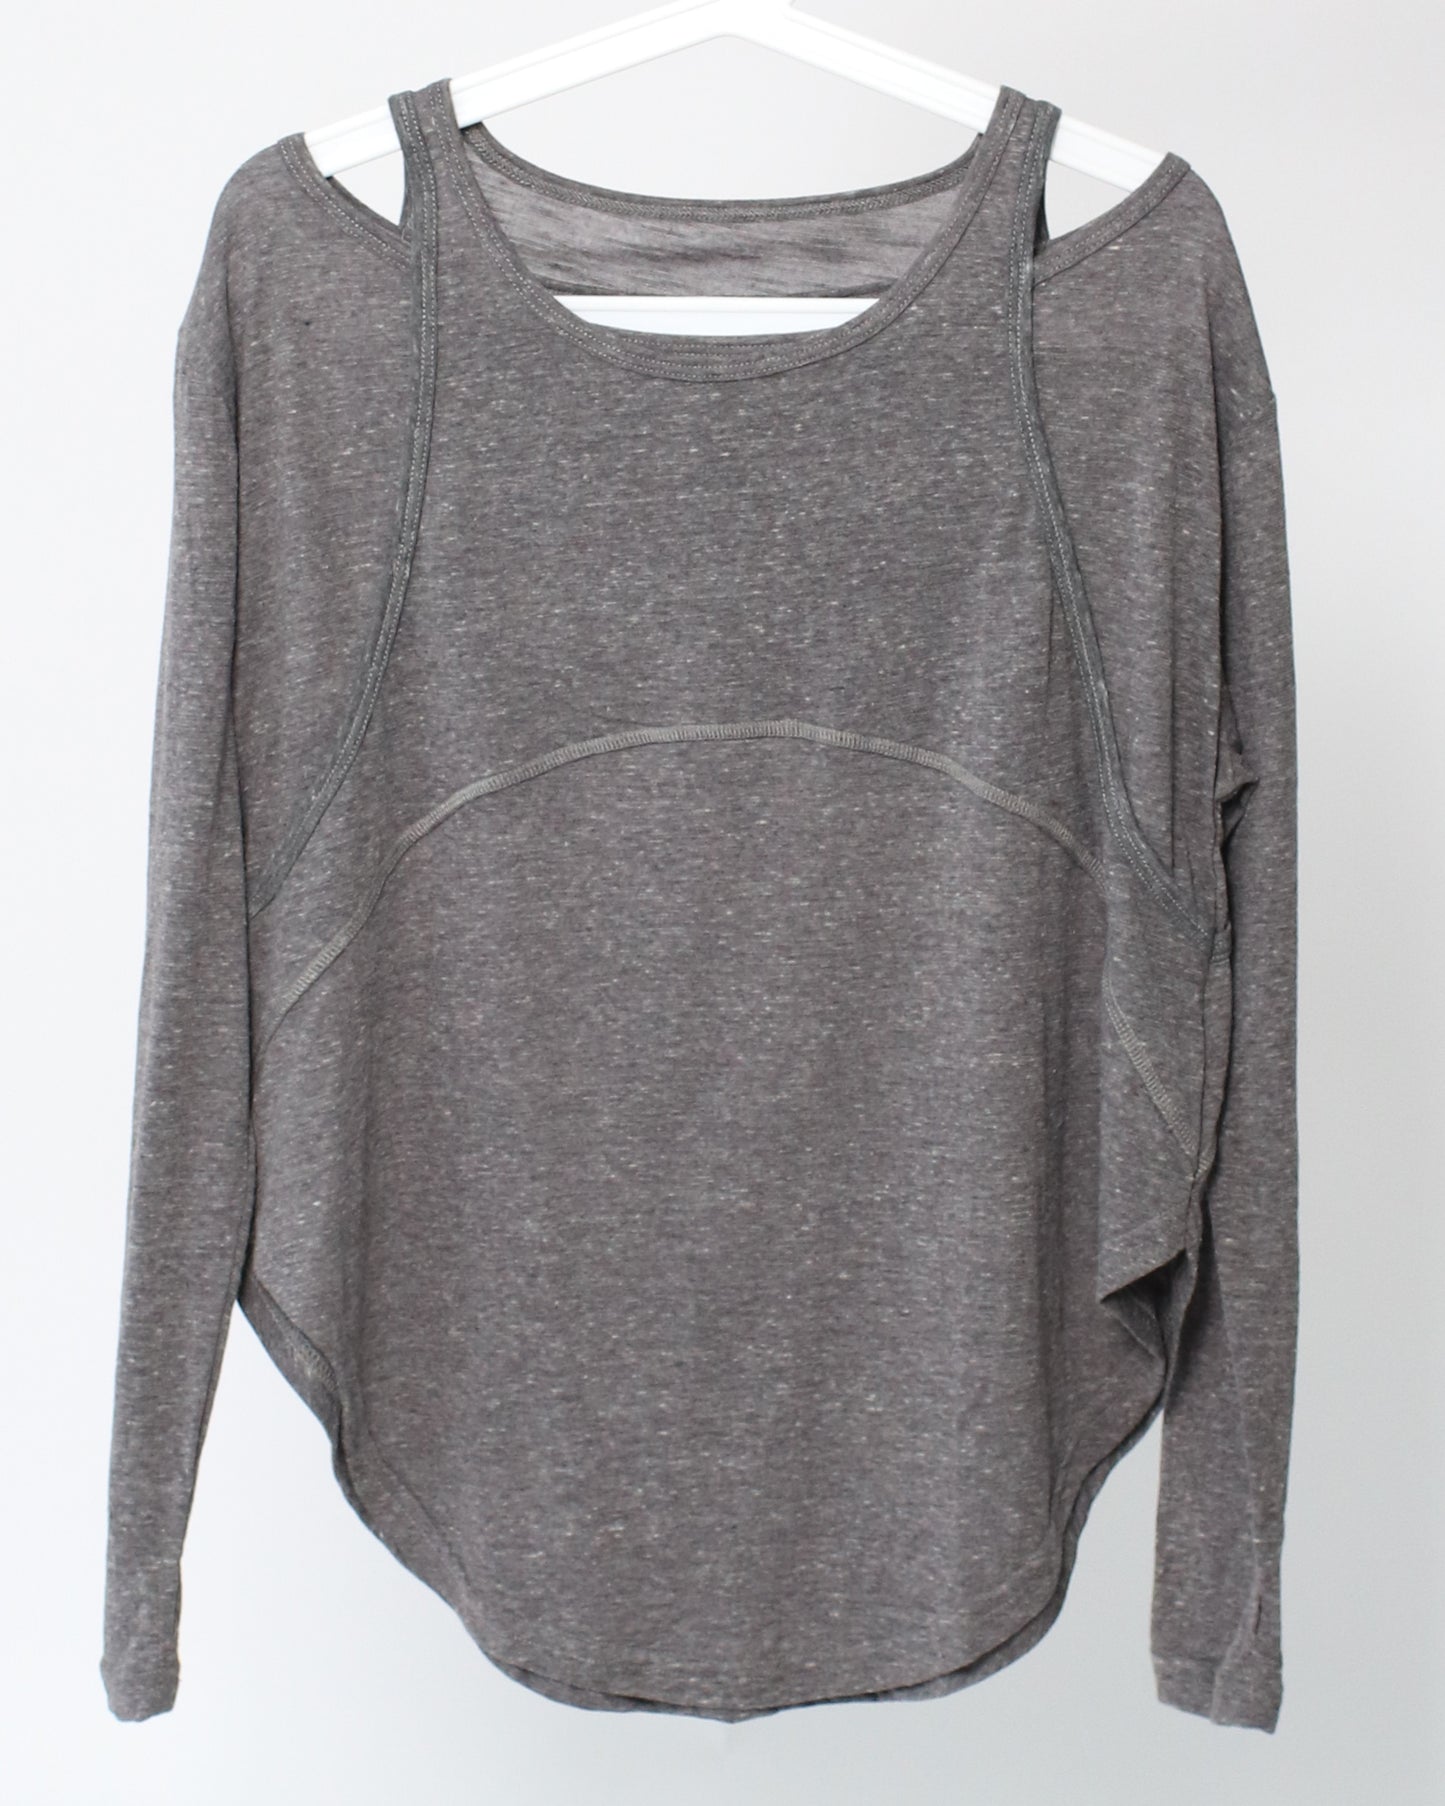 marble grey cutout back sports top *pre-order*